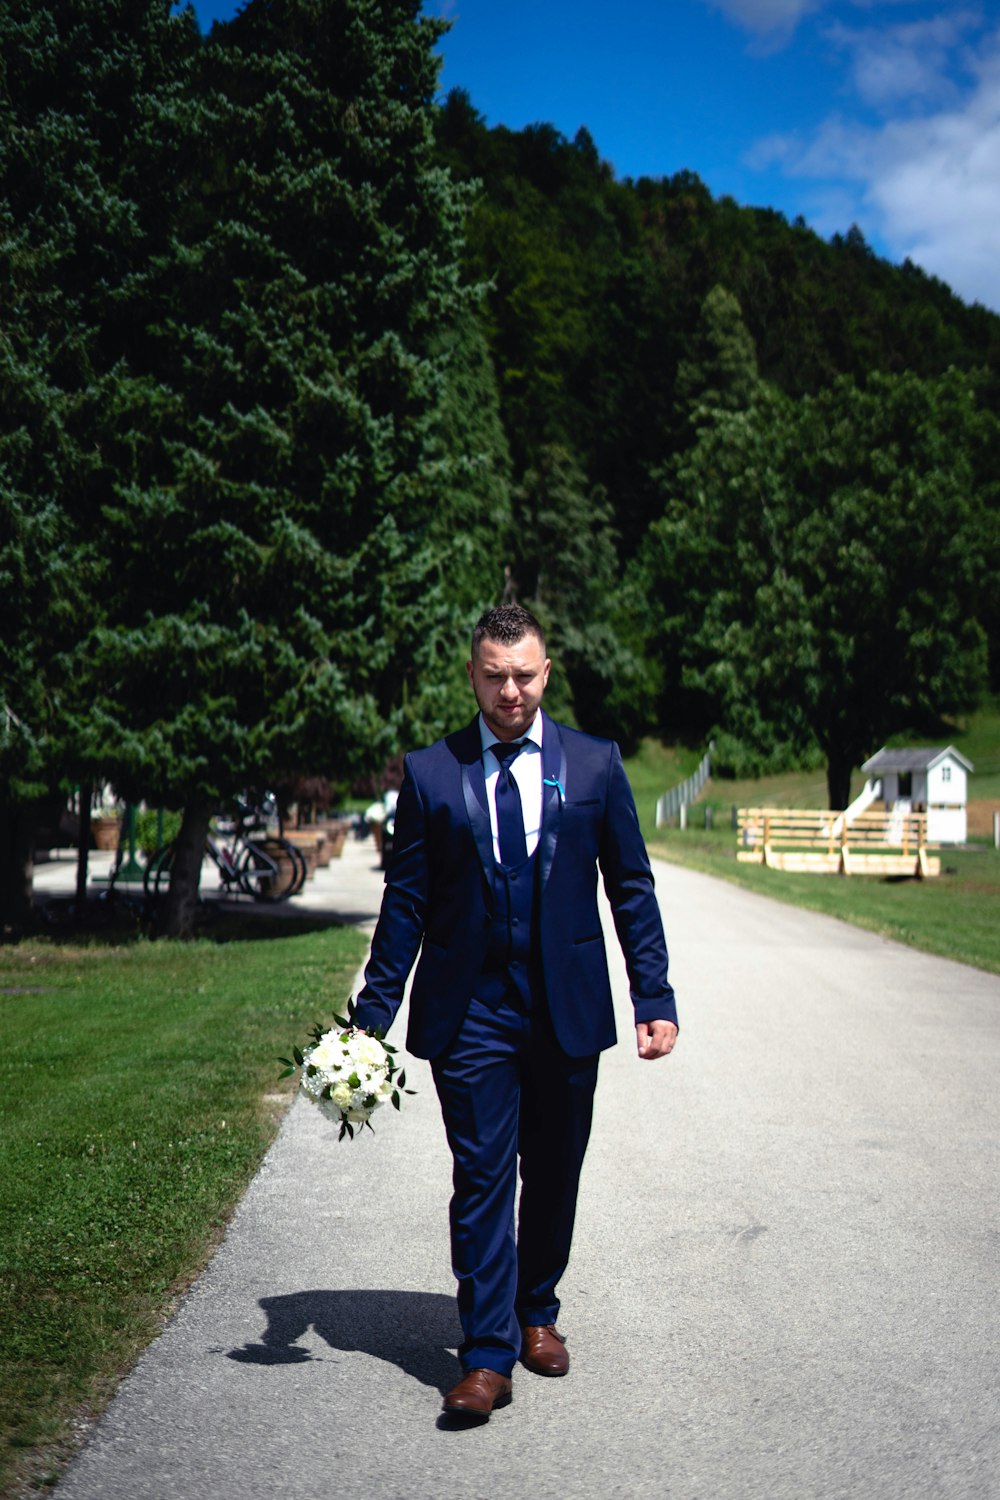 a man in a suit walking down a path